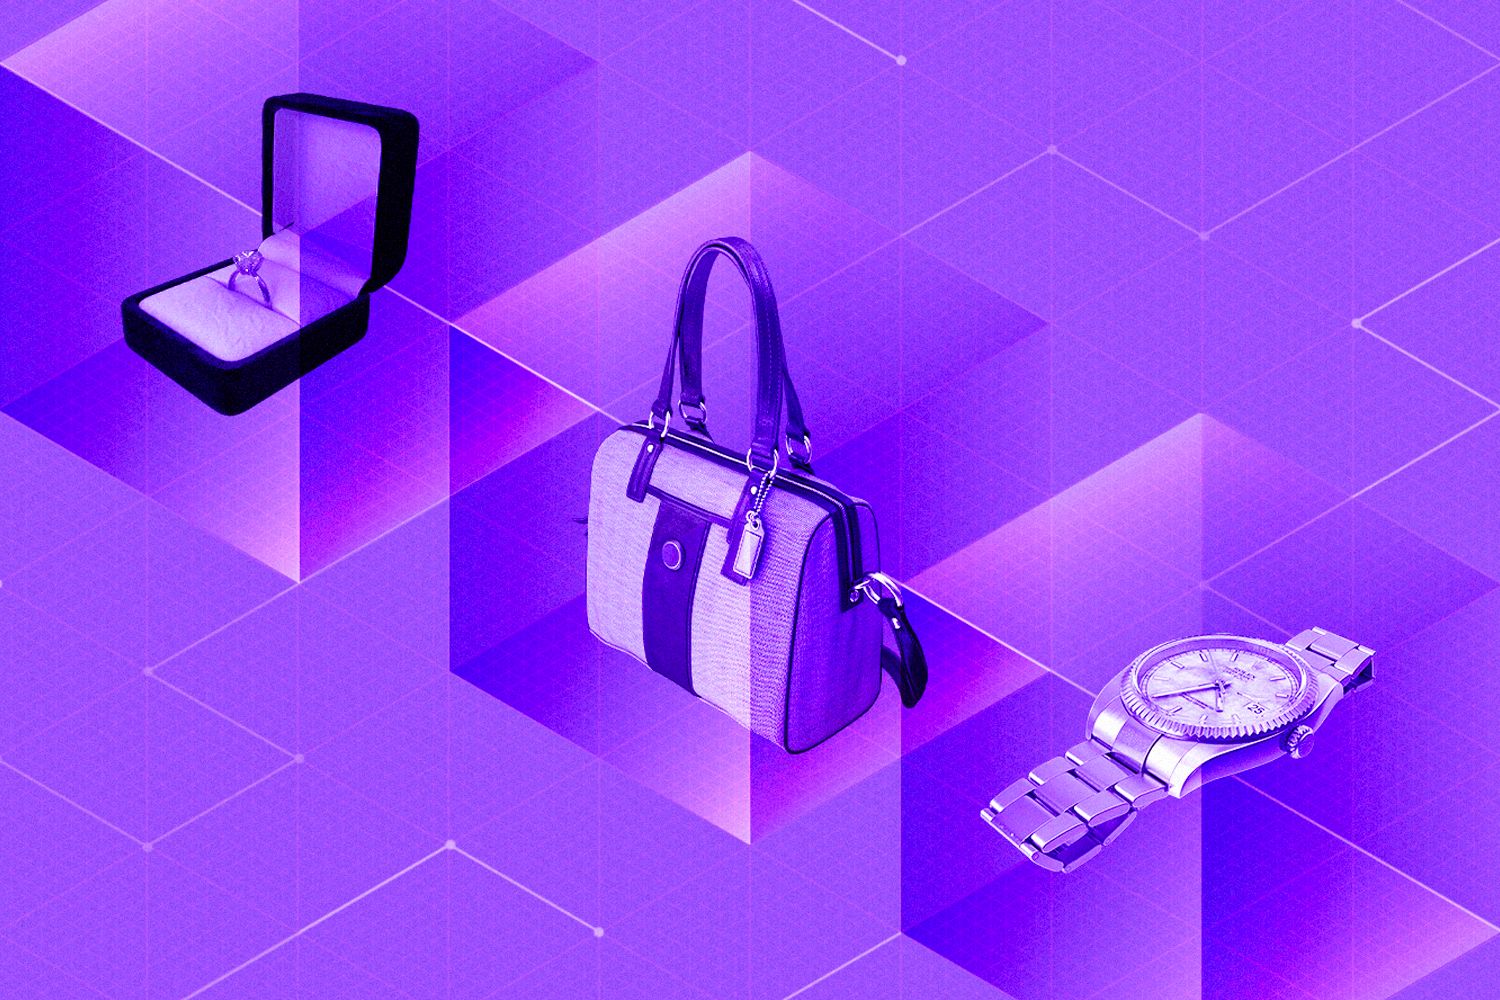 Luxury Fashion Brands Are Already Making Millions in the Metaverse